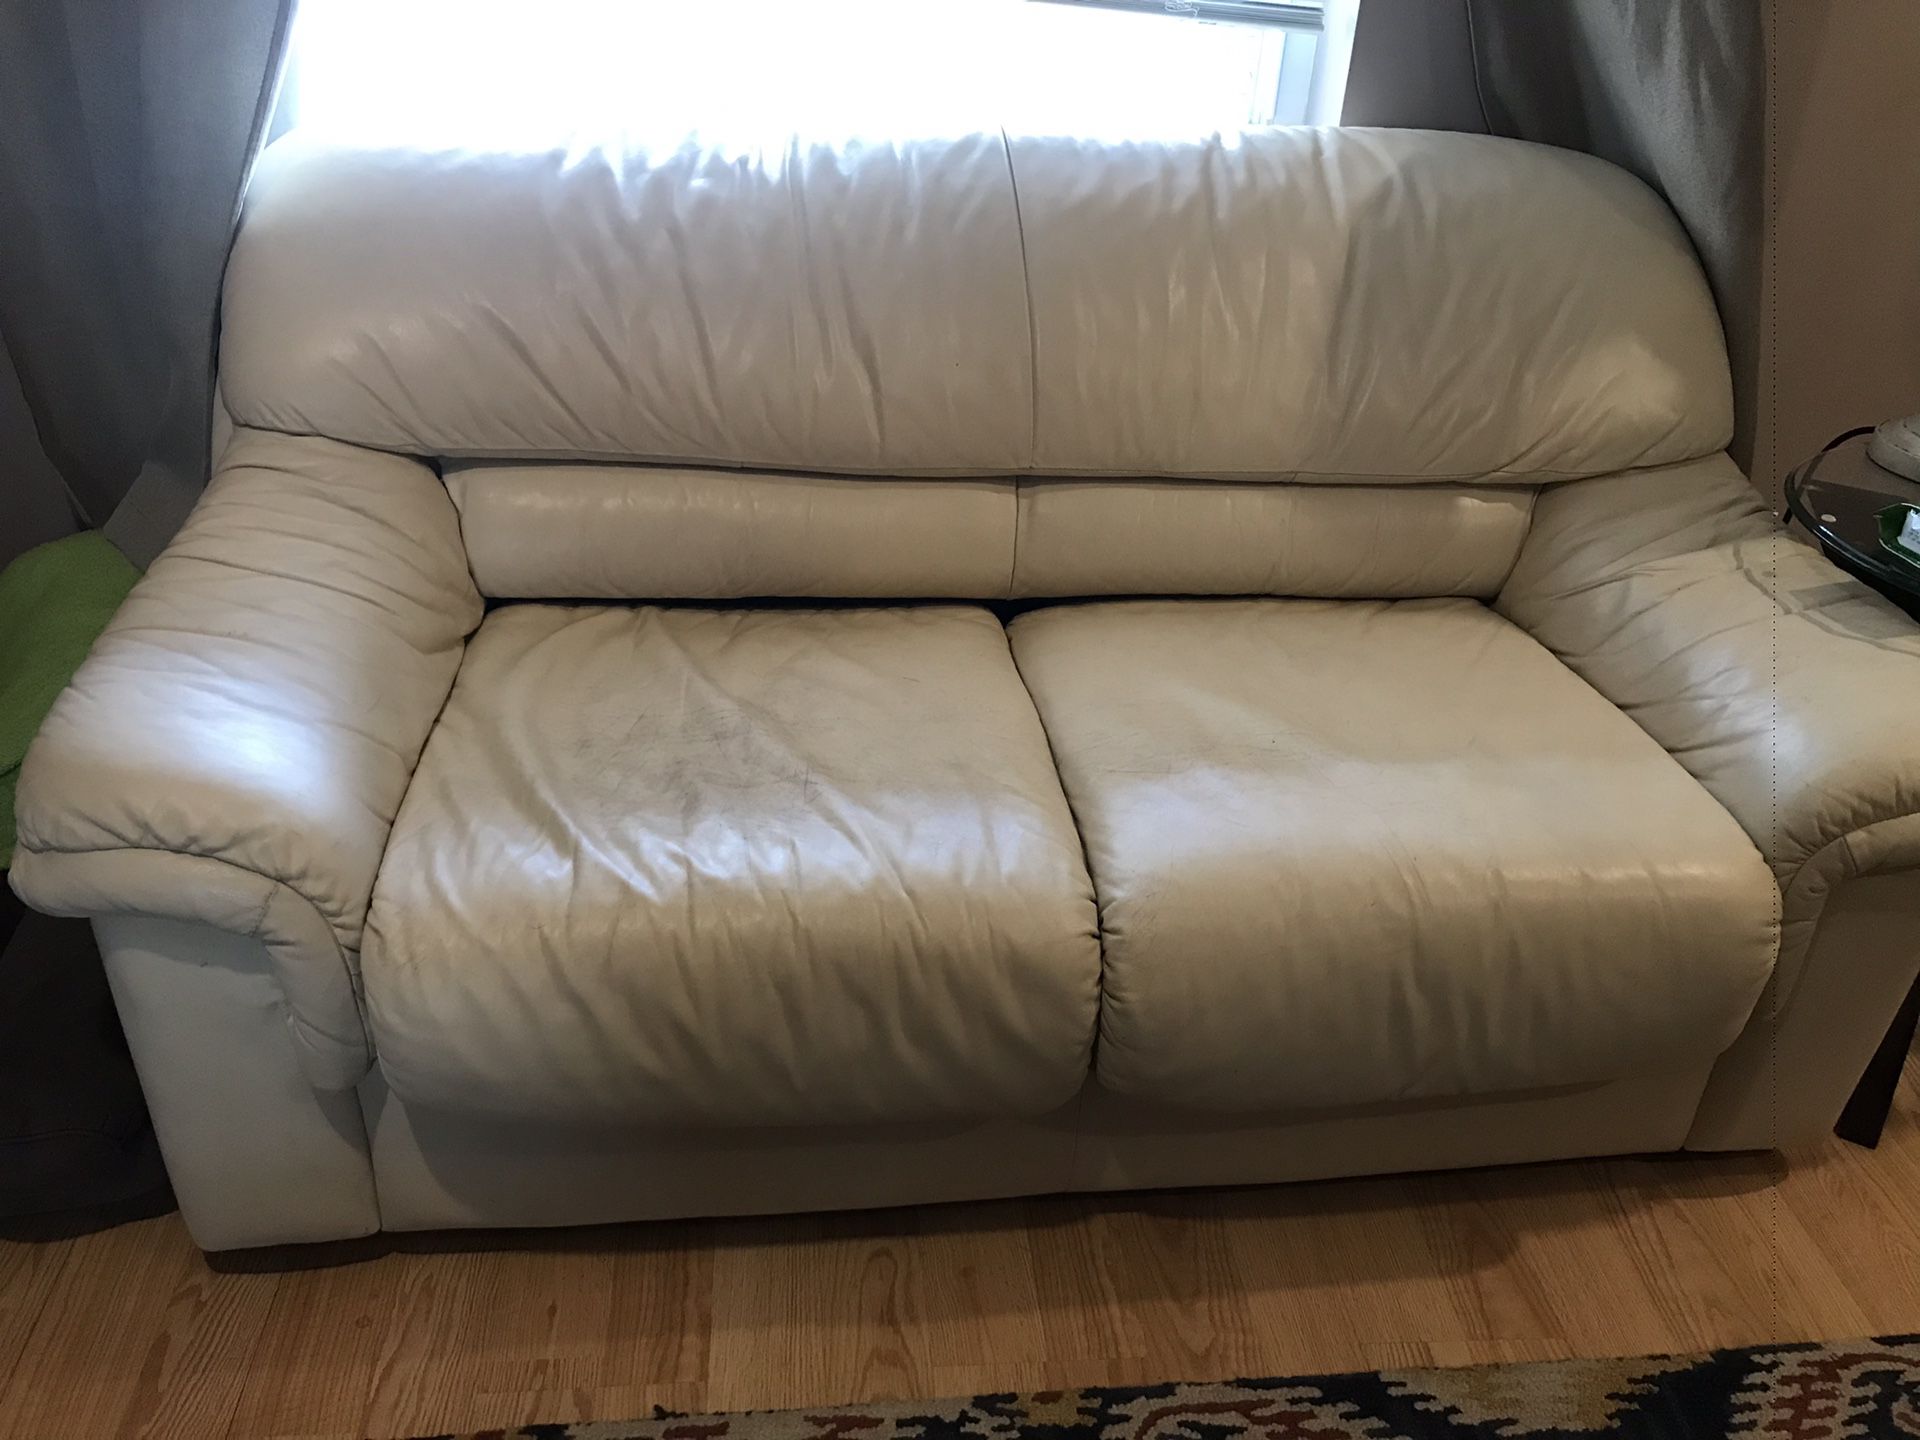 White leather couch/sleeper sofa